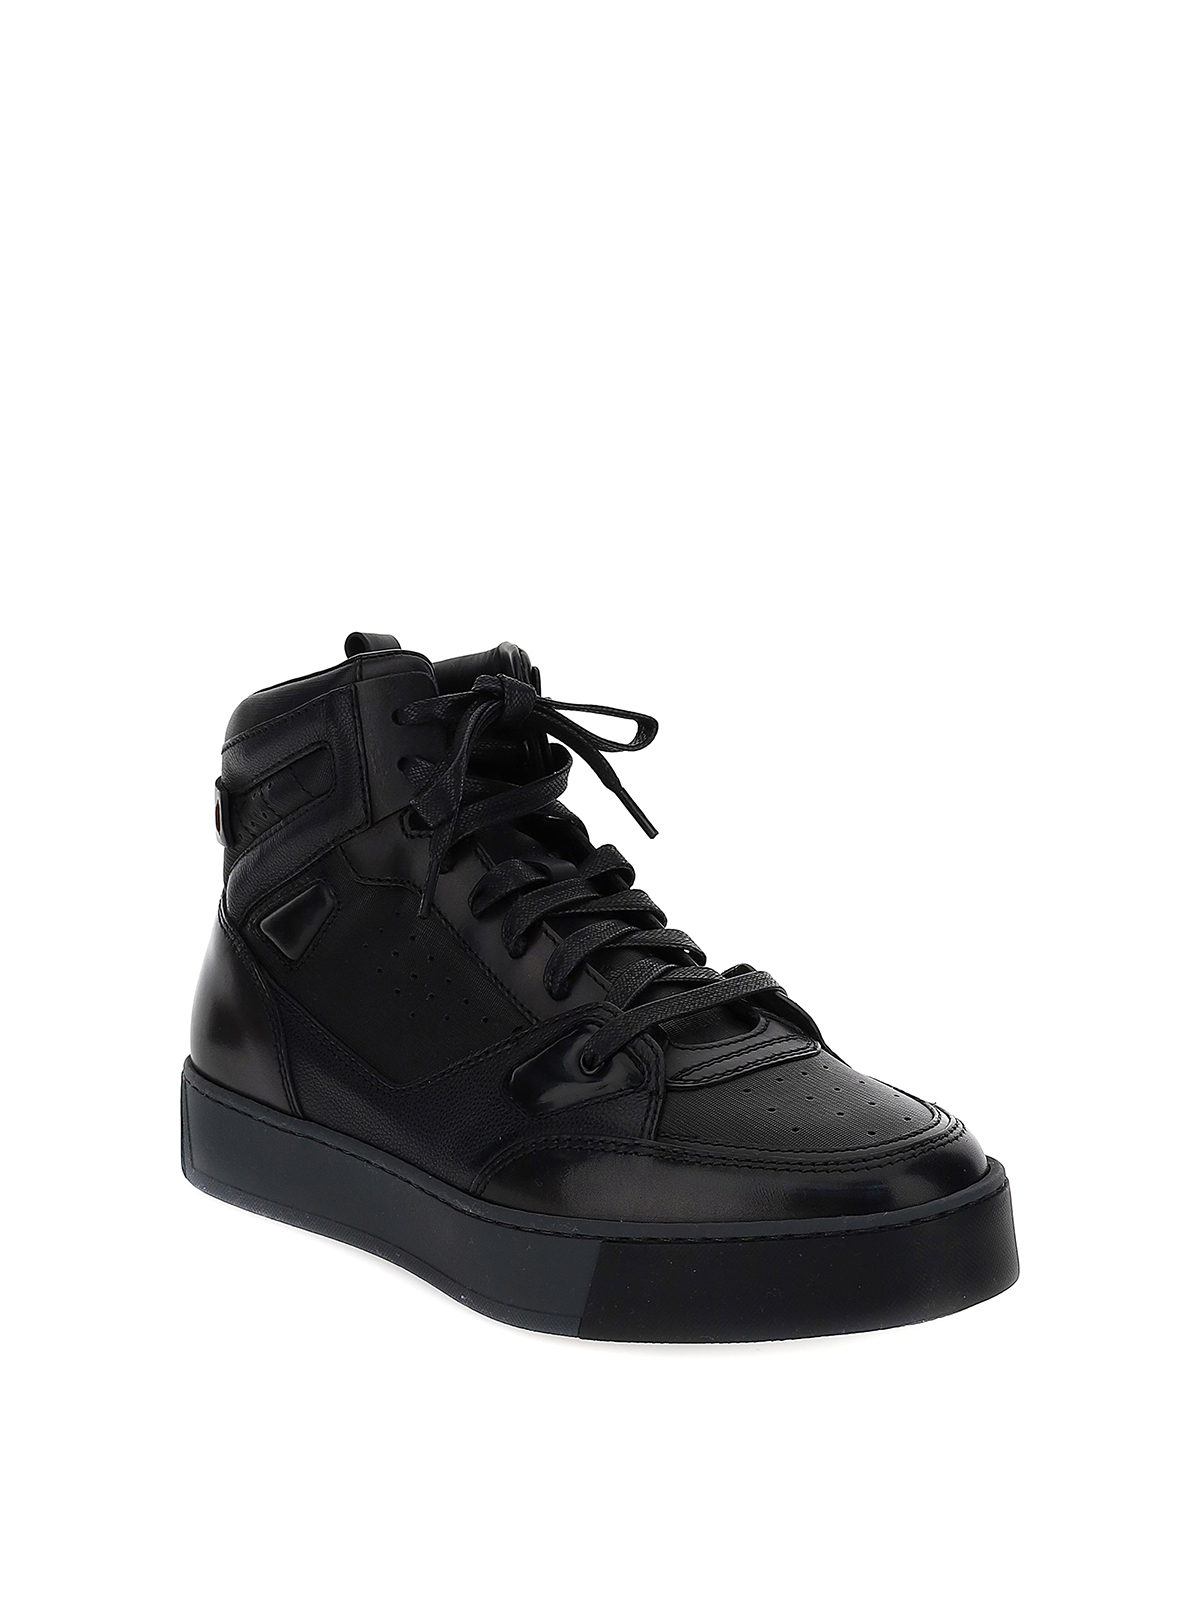 Dolce & Gabbana Leather Sneakers Calfskin in Black for Men Mens Shoes Trainers High-top trainers 